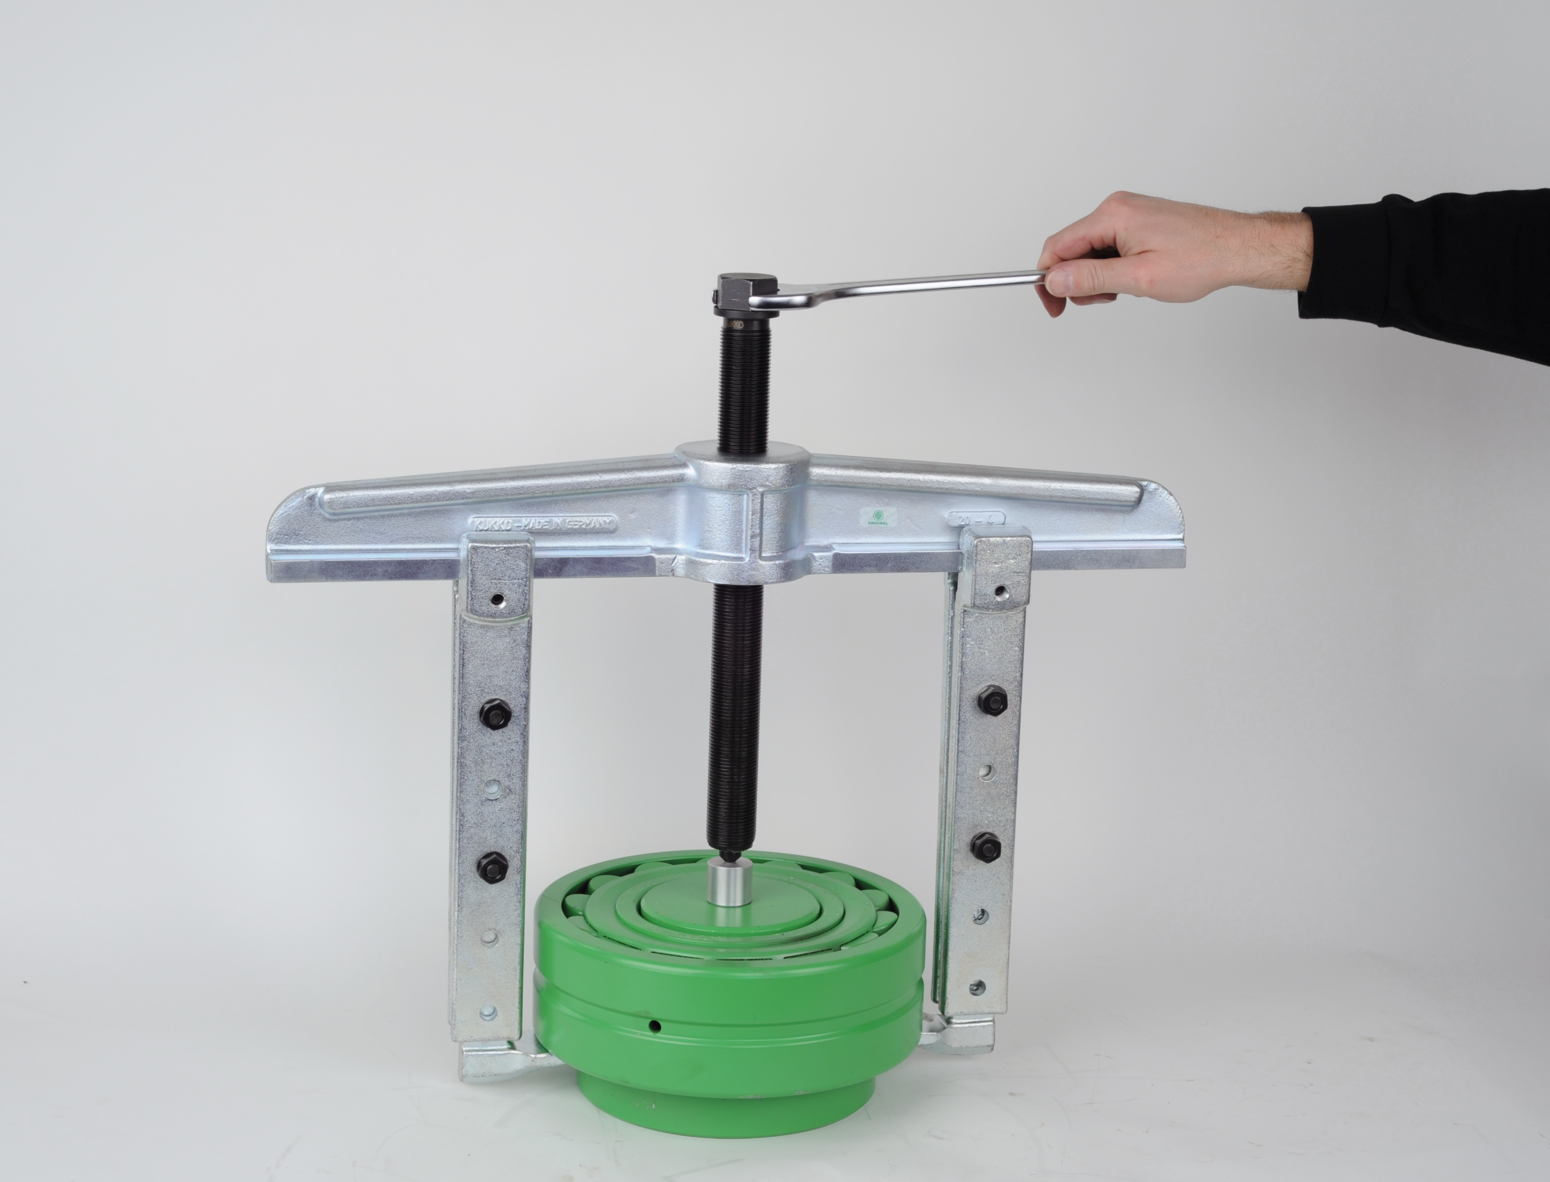 The 2-arm universal extractor 20-4-AV with adjustable clamping depth when extracting a large ball bearing